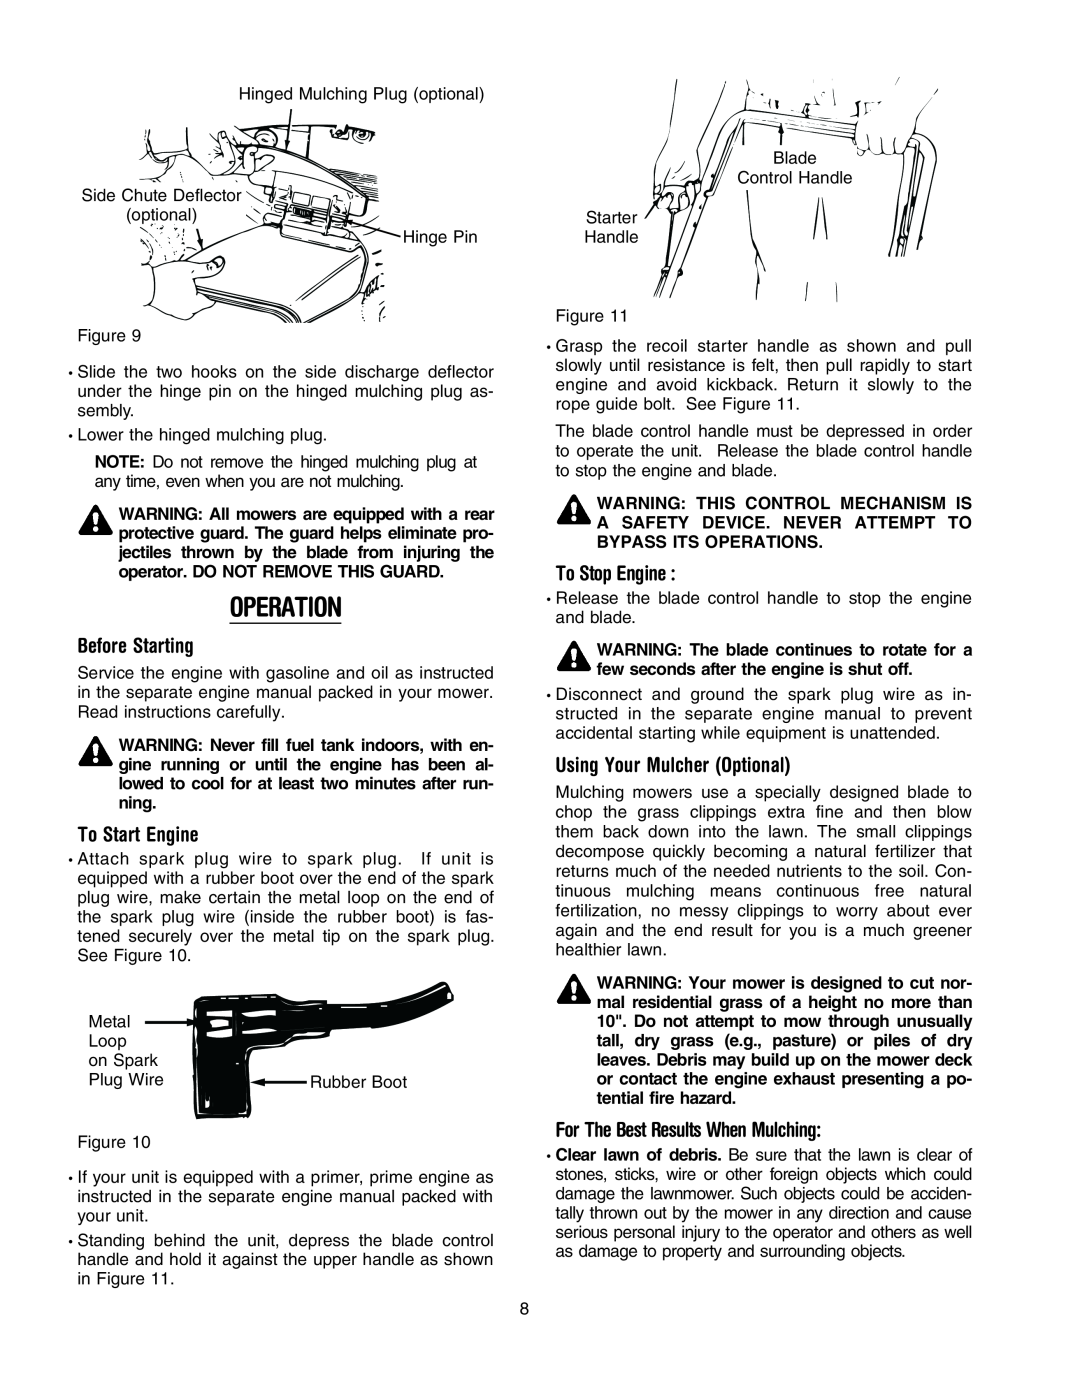 Troy-Bilt 400 Series manual Operation, Before Starting, To Start Engine, To Stop Engine, Using Your Mulcher Optional 